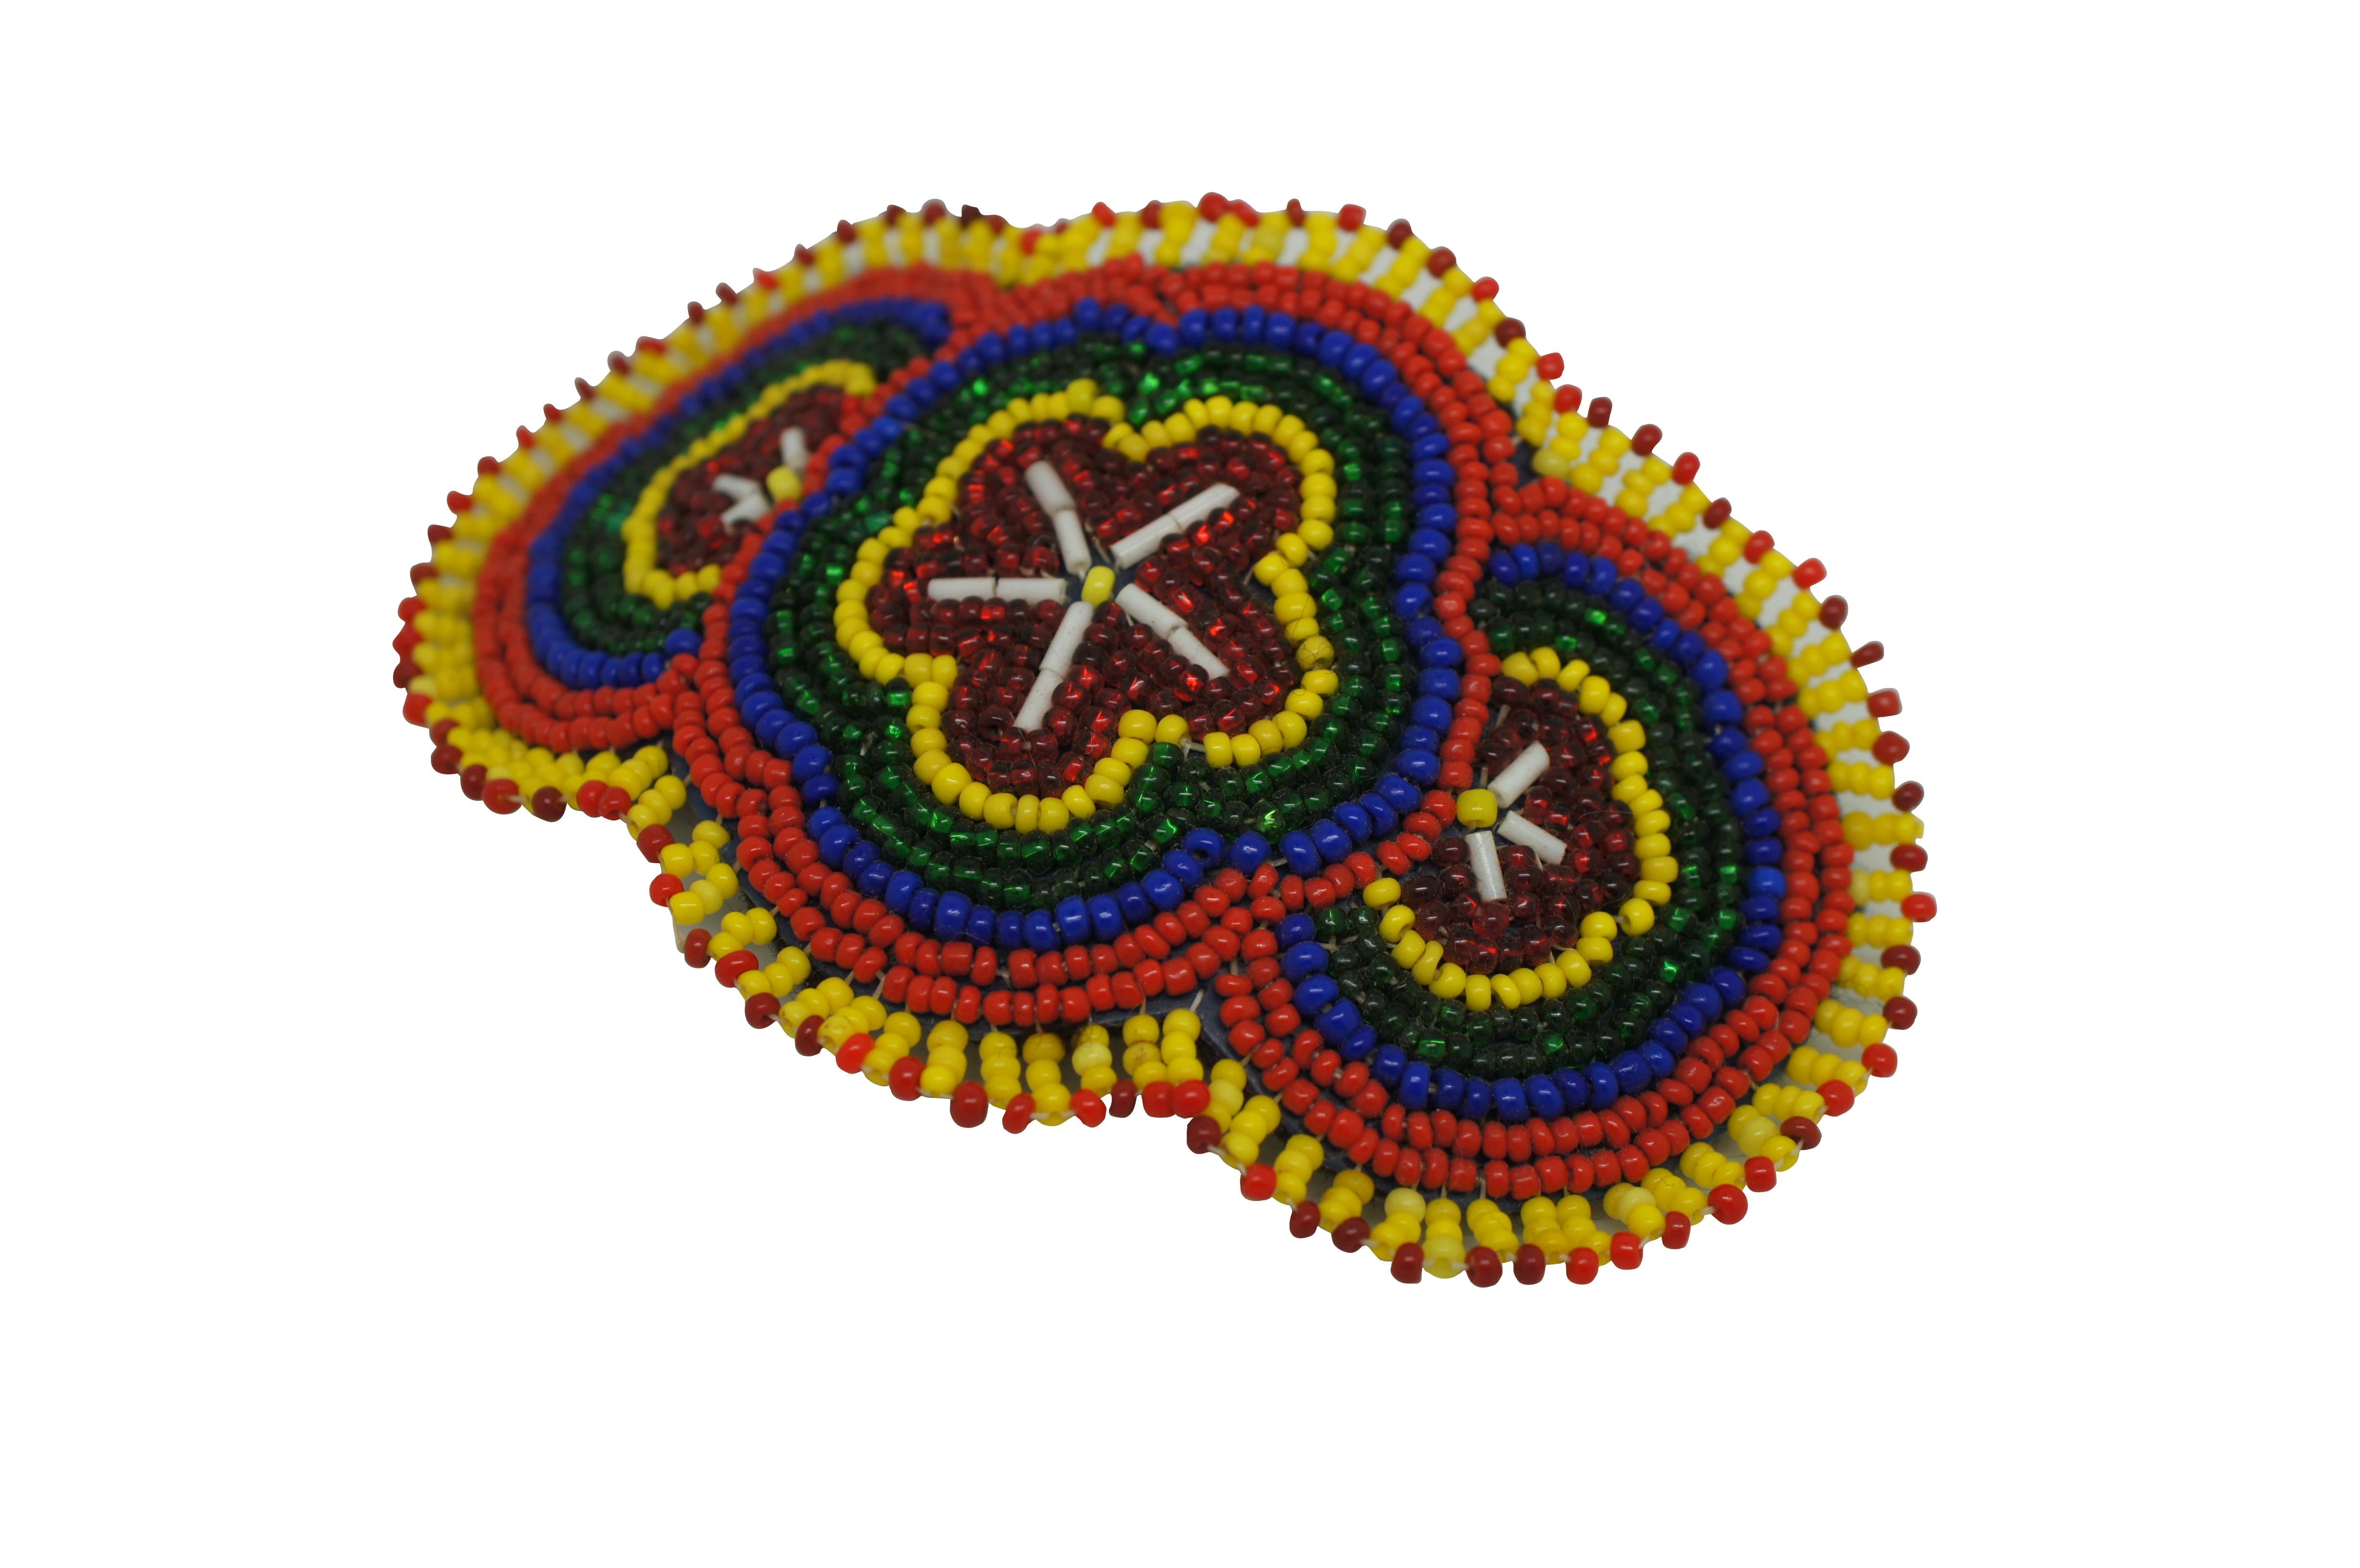 Vintage Native American / Navajo seed bead hair clip / bow / barrette featuring a colorful floral theme with white, red, yellow, green, and blue.  Purchased in the 1960s-1970s at Gilbert Ortegas Indian Arts, Gallup New Mexico.

Dimensions:
4.75